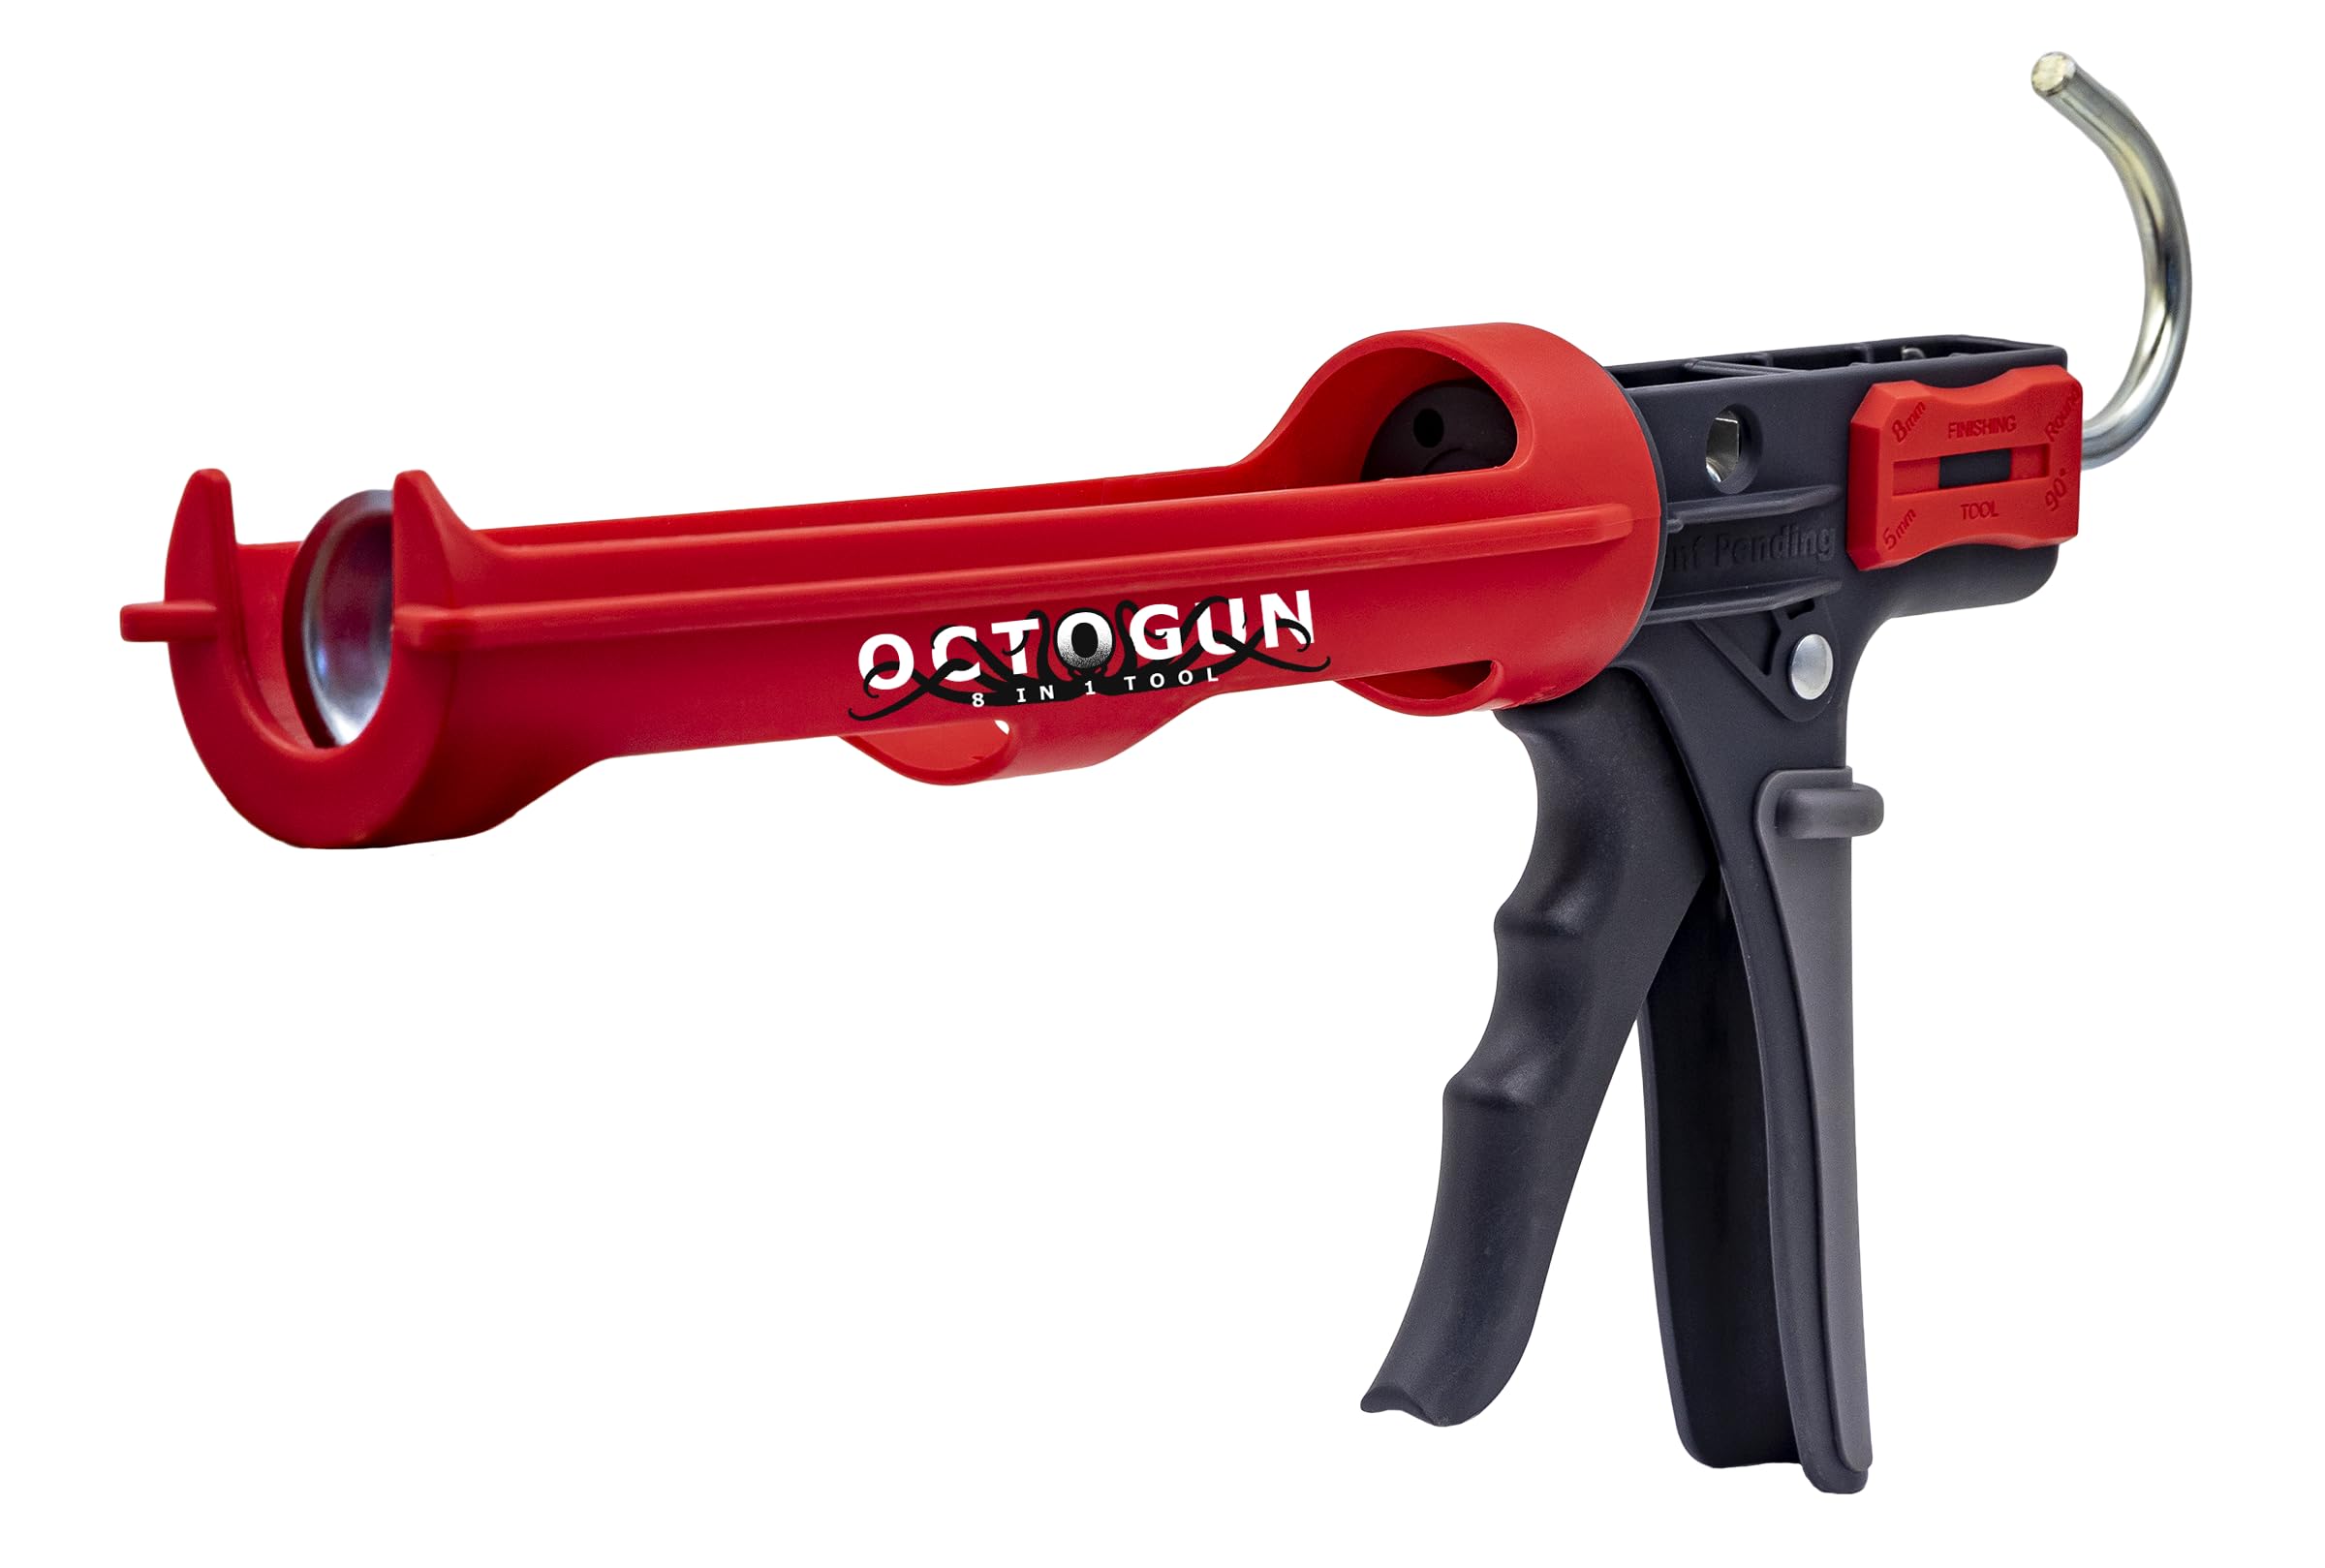 Newborn Octogun Model 208D Drip-Free Caulk Gun with Integrated Tooling Square and Removal Tool